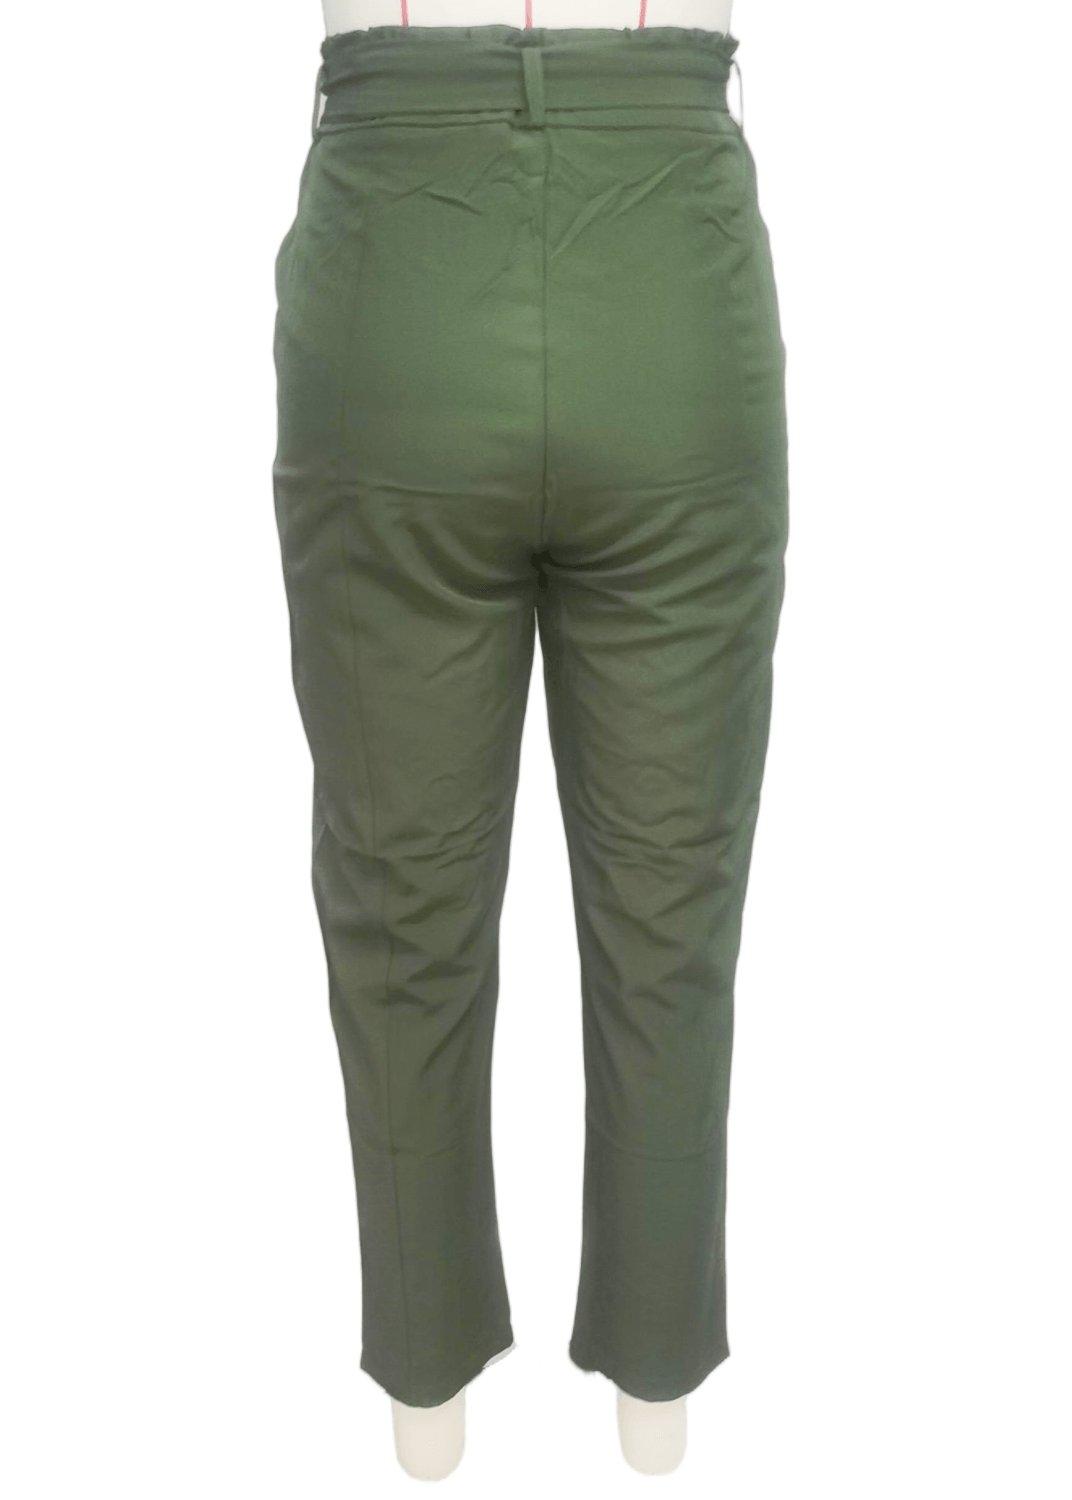 Green Casual Paperbag Waist Straight Leg Pants With Belt